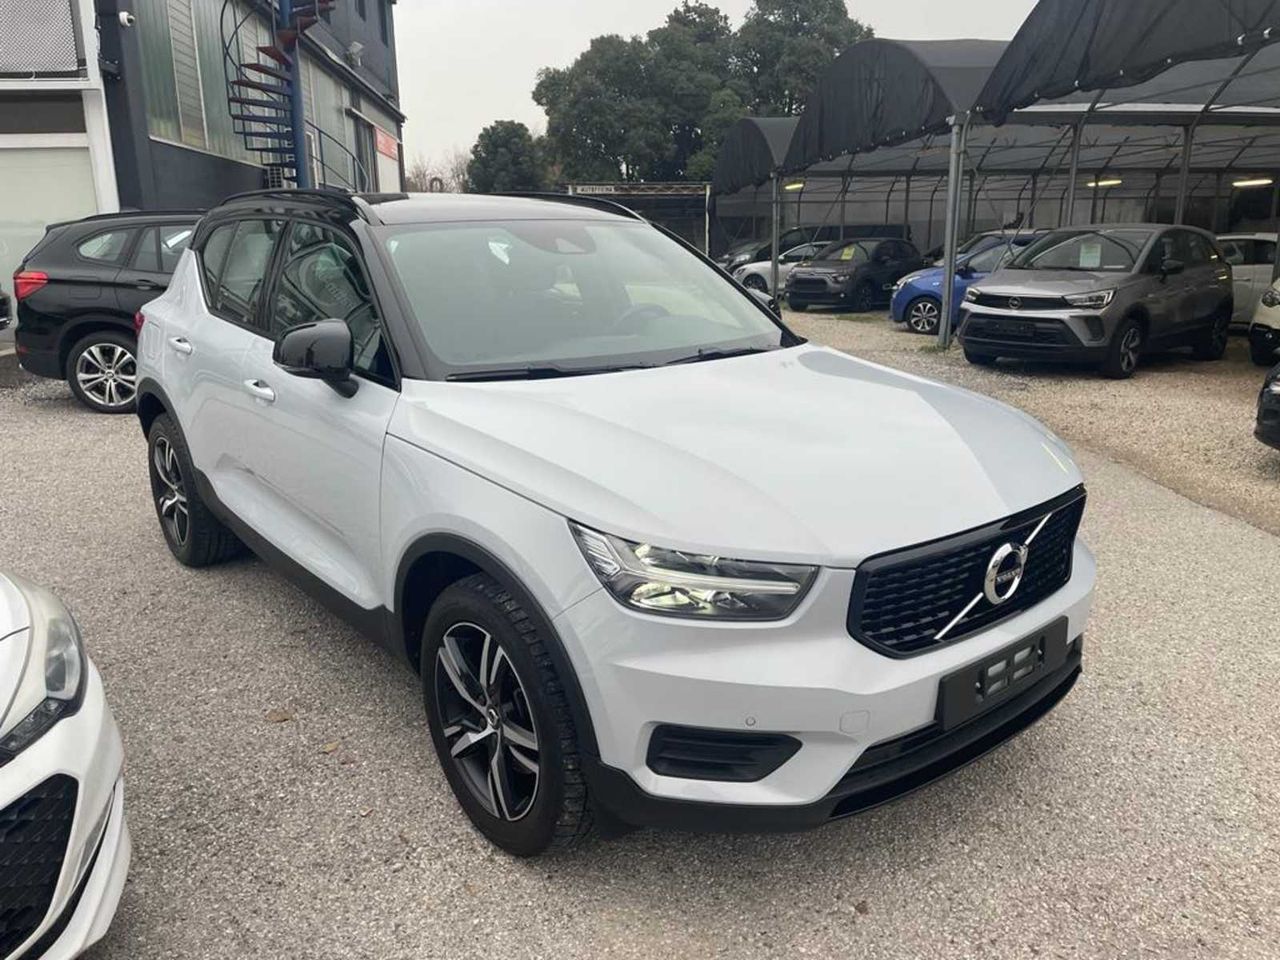 VOLVOXC40 (2017-->)D4 AWD Geartronic R-design